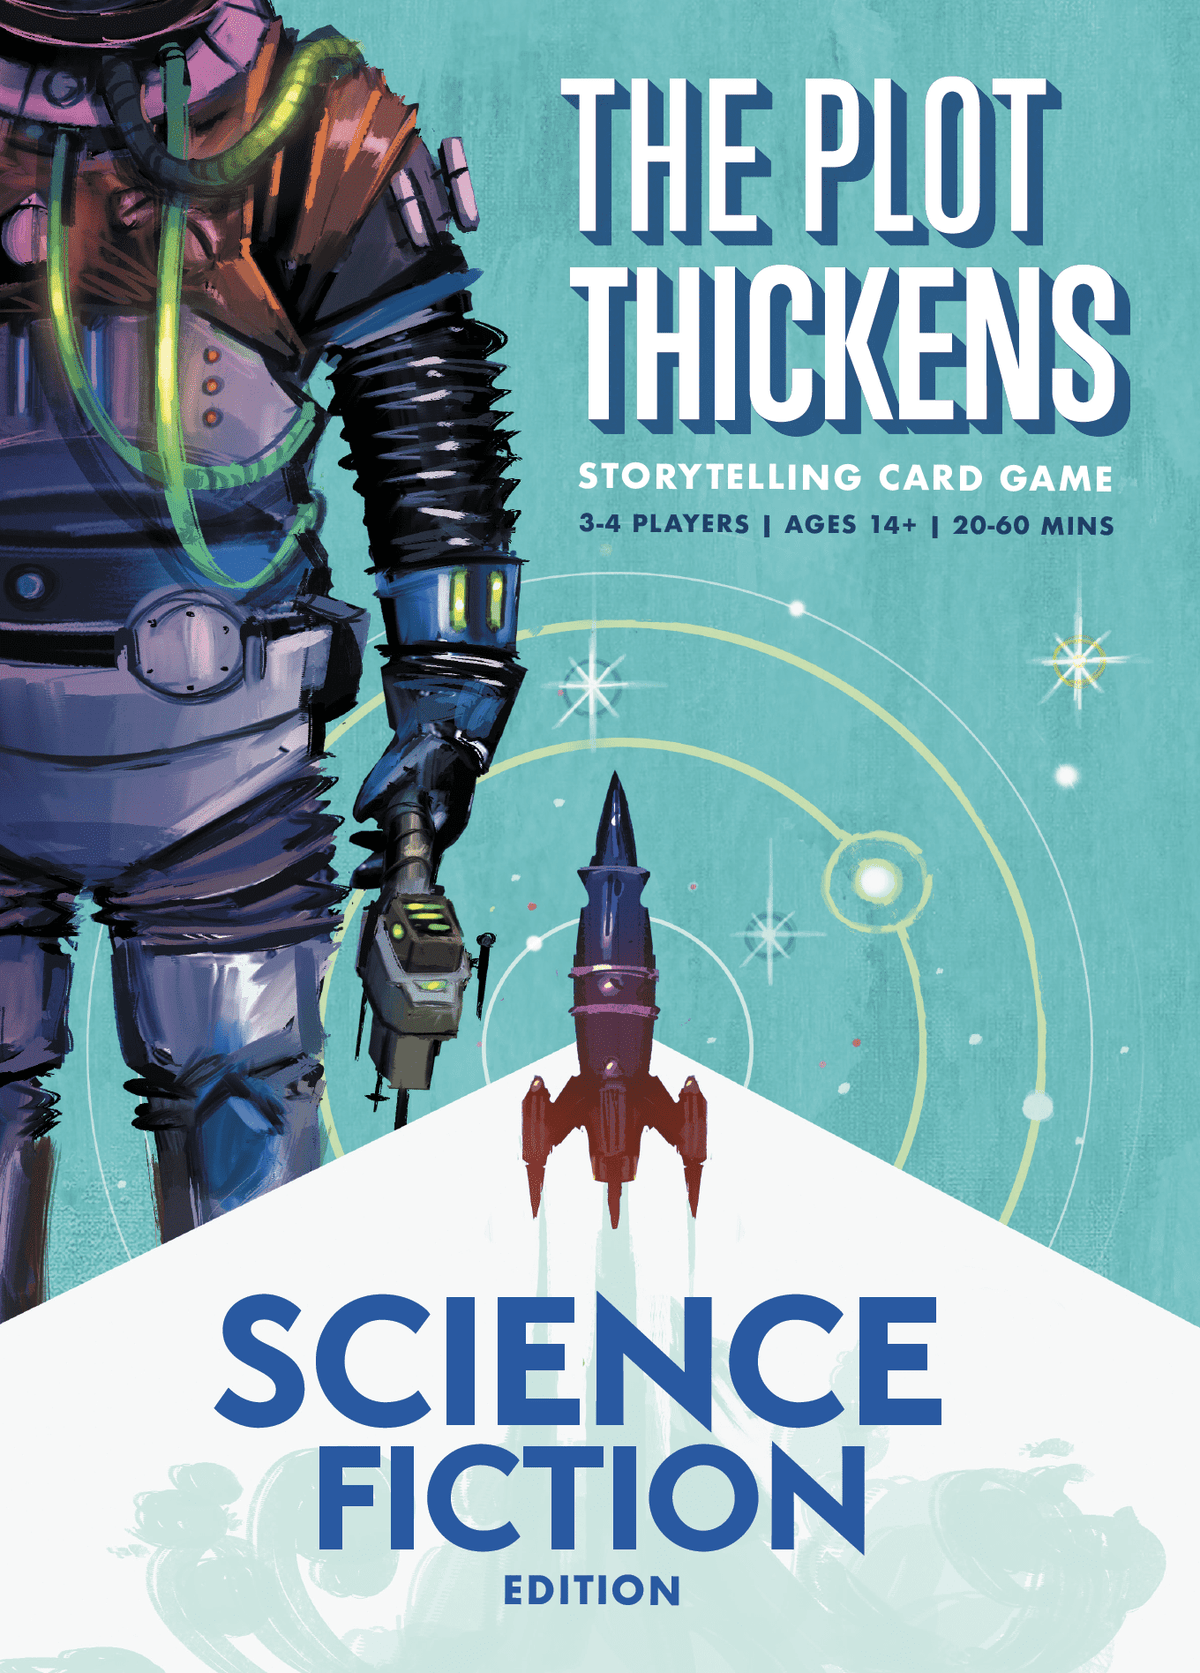 The Plot Thickens Science Fiction Edition (Preorder)